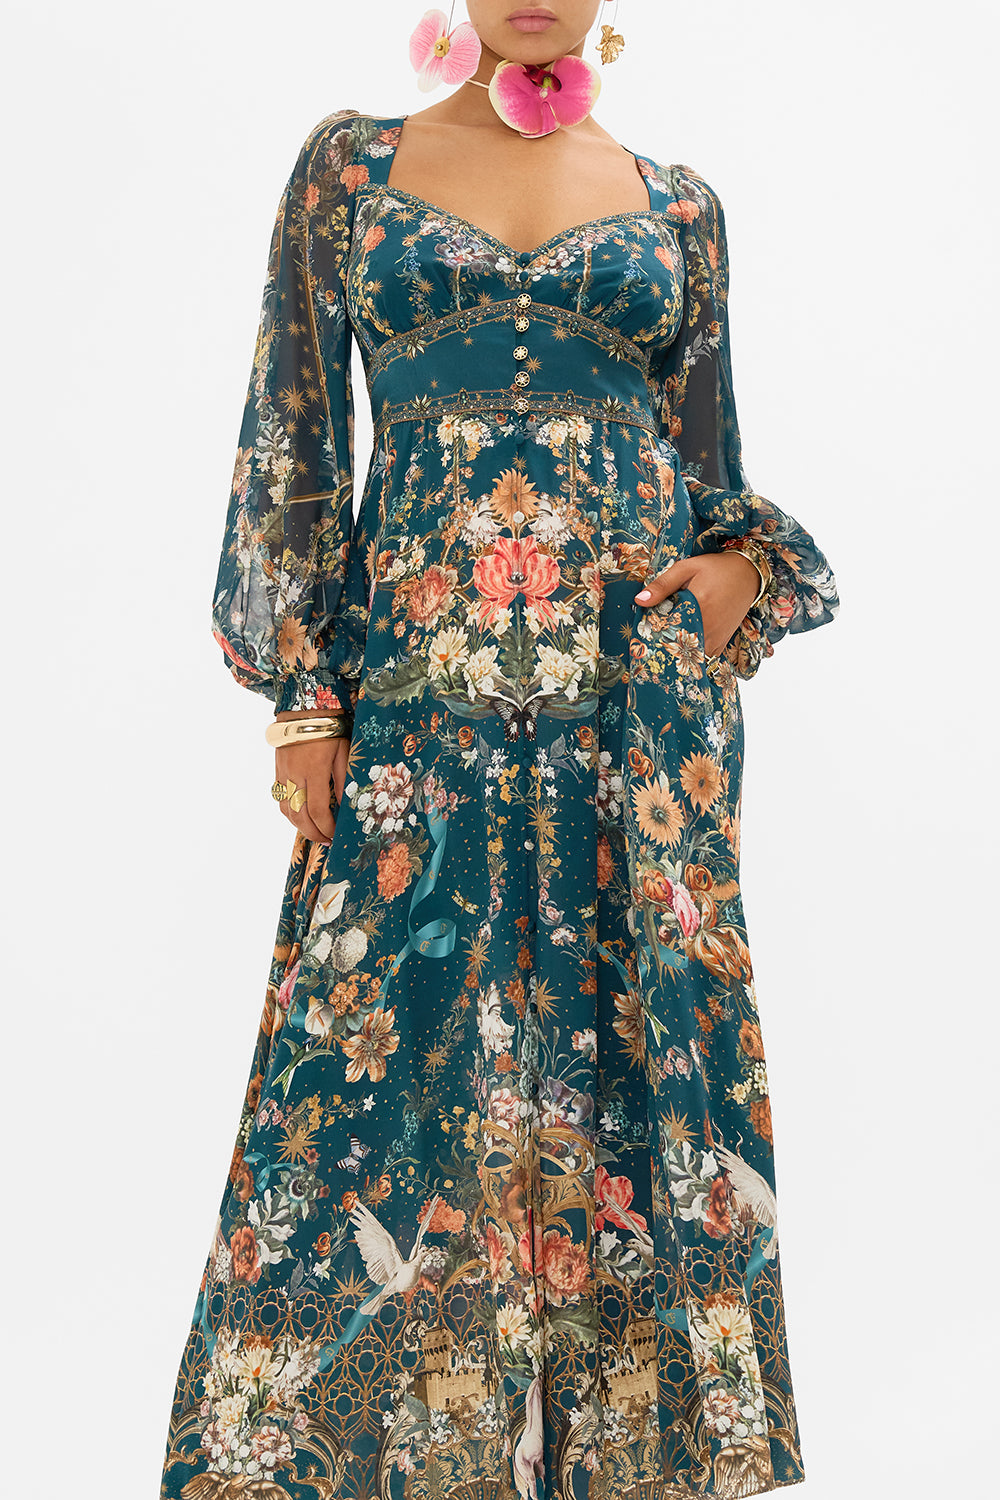 CAMILLA floral  silk dress in She Who Wears The Crown print